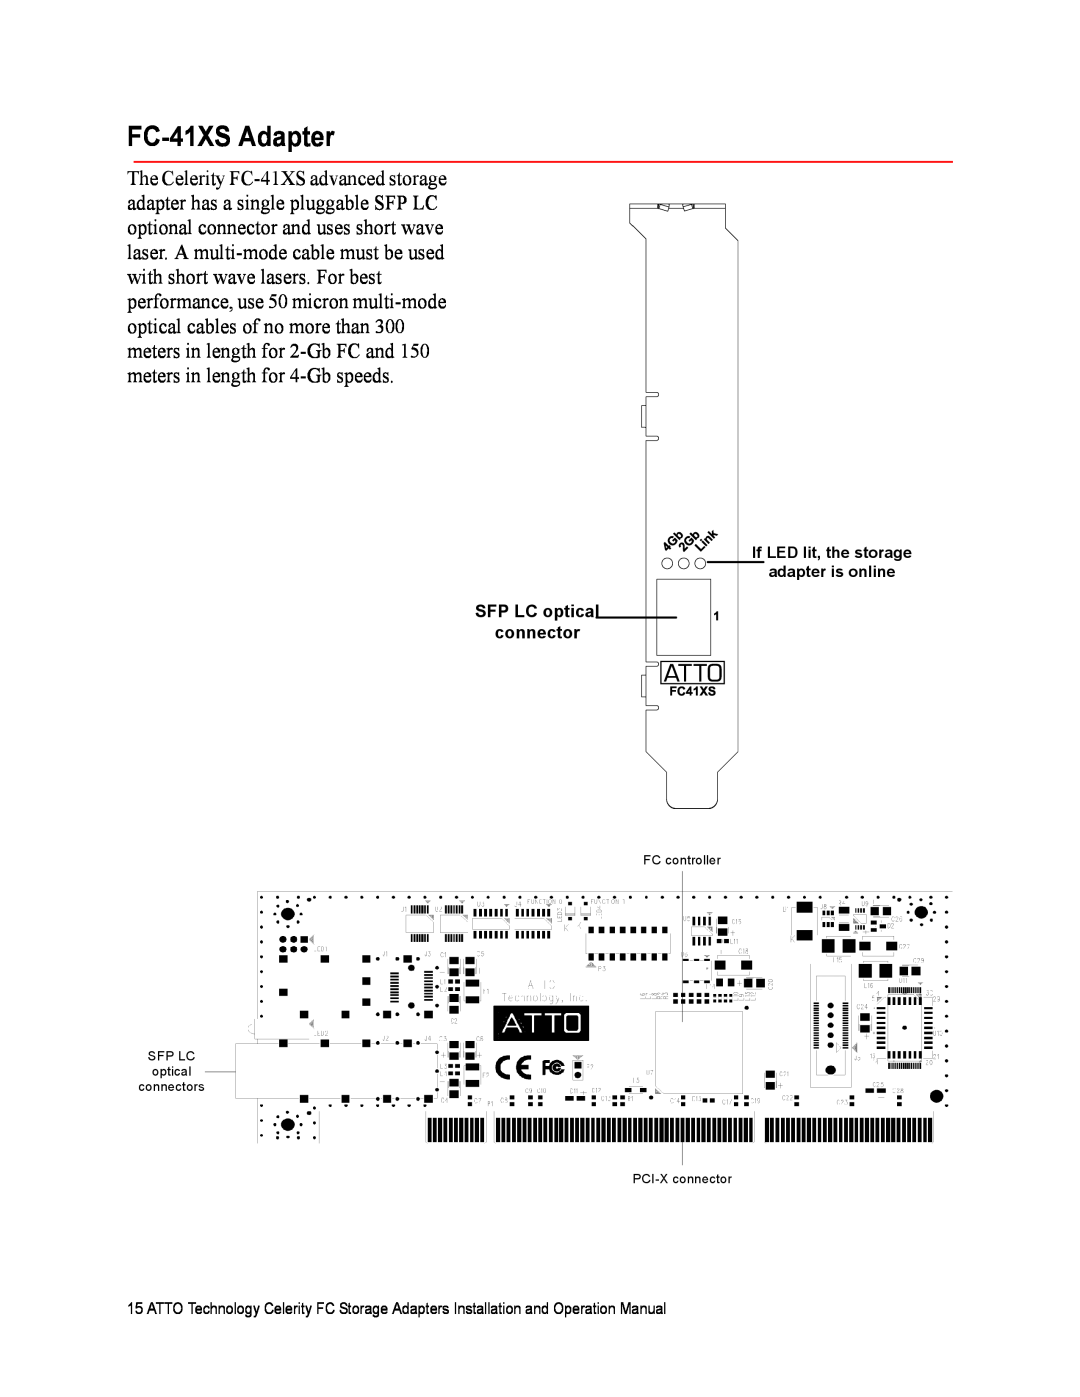 ATTO Technology FC-42XS, FC-44ES, FC-42ES operation manual FC-41XS Adapter, SFP LC optical connector 